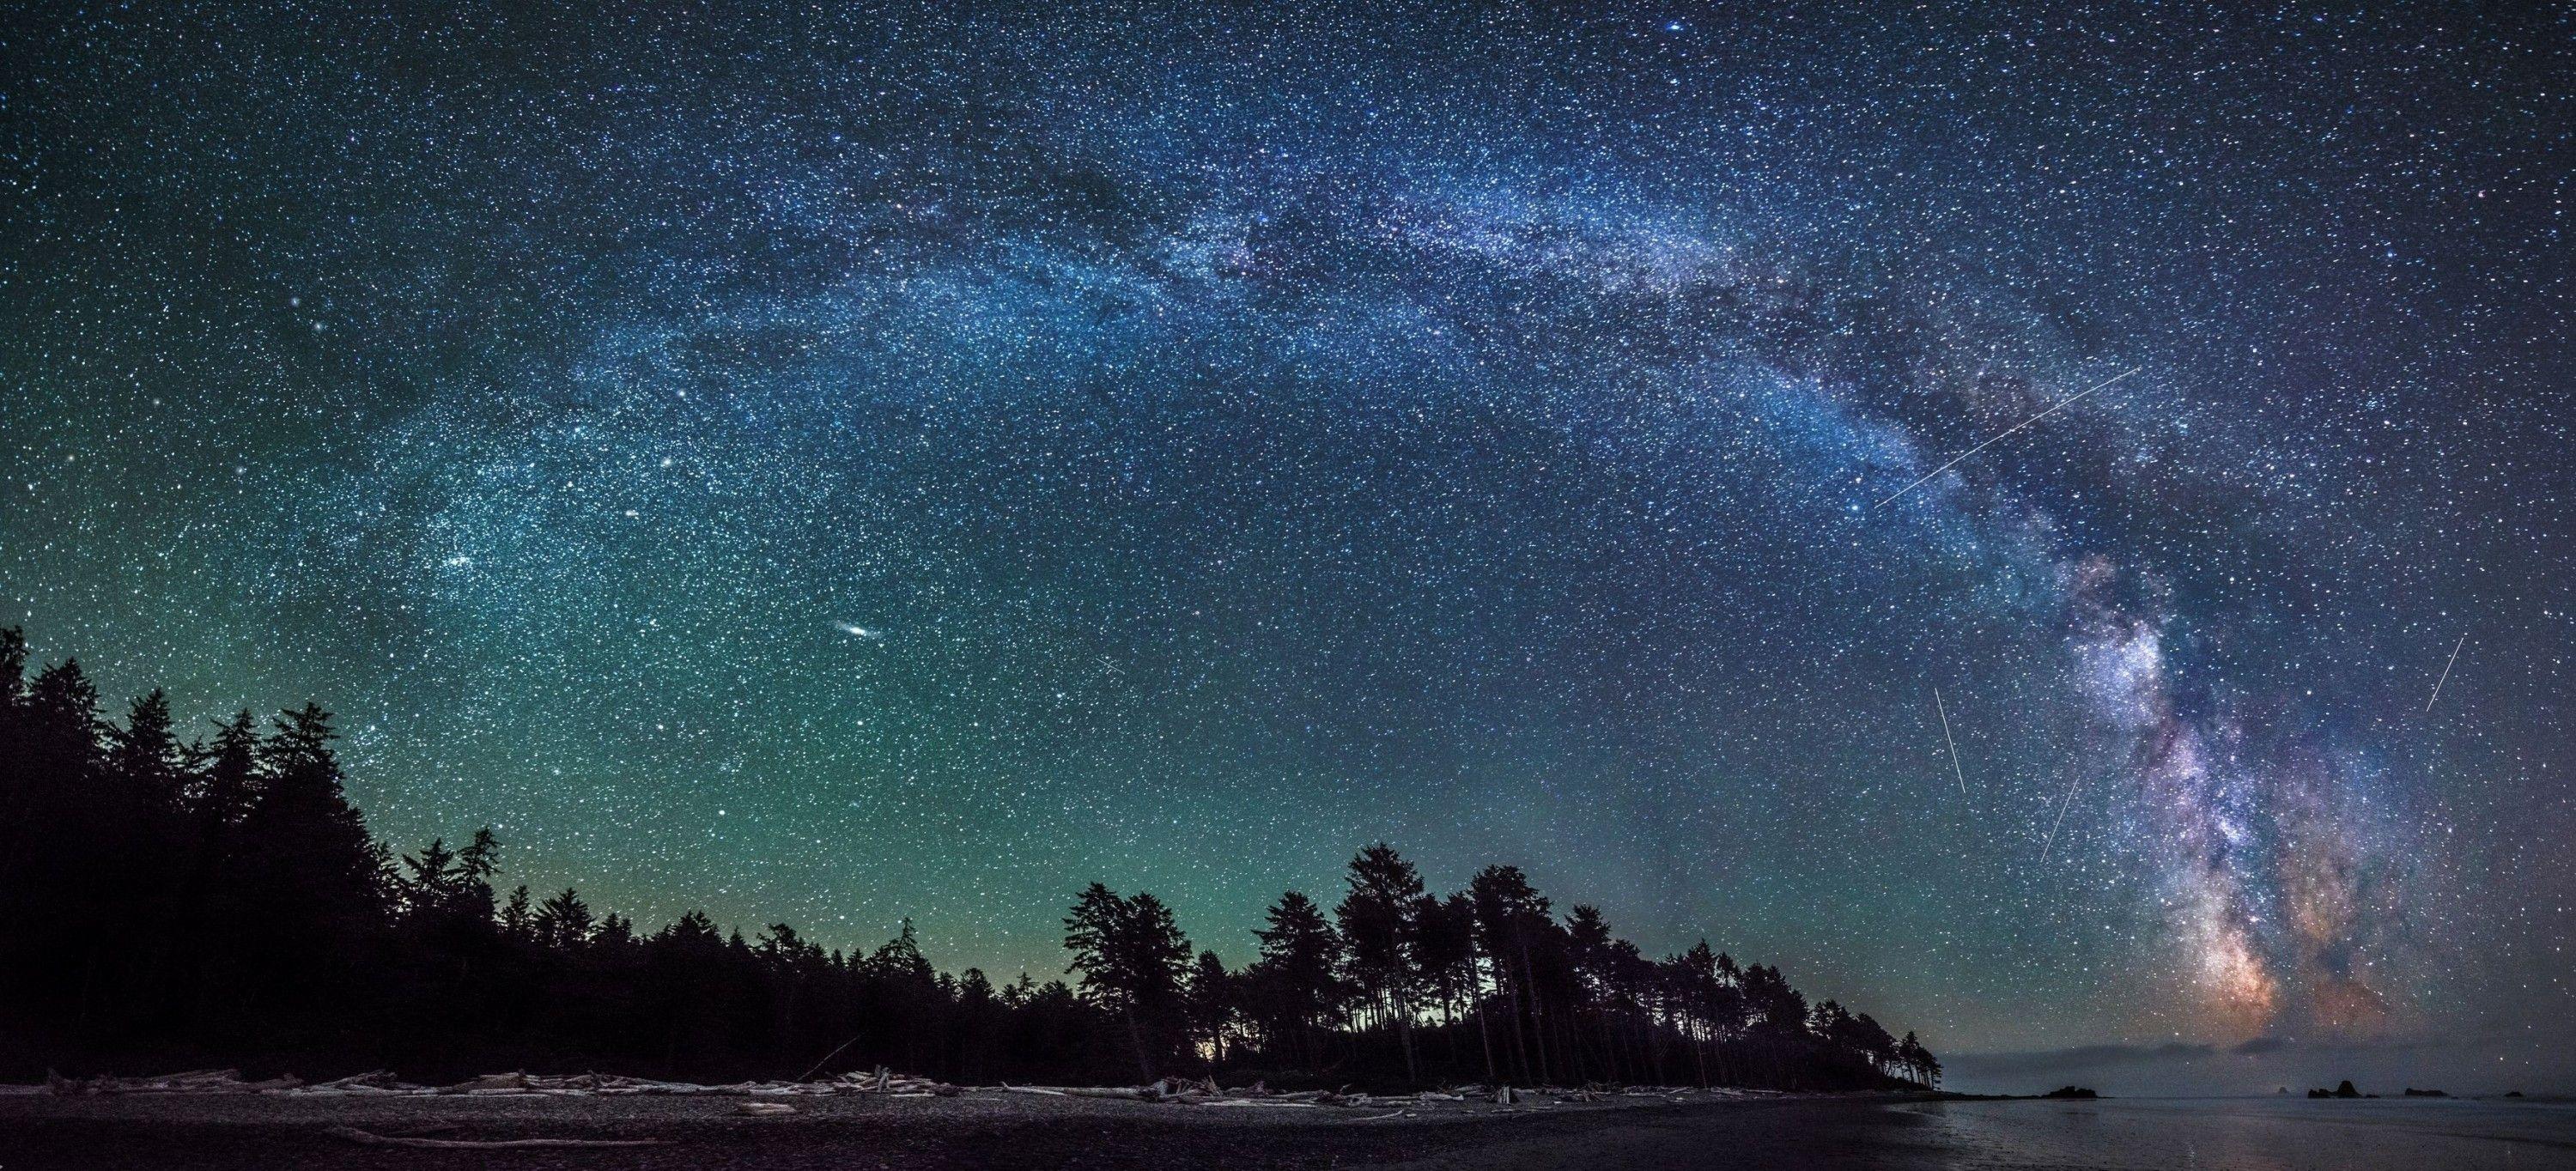 Home of the annual Night Sky Festival, Acadia National